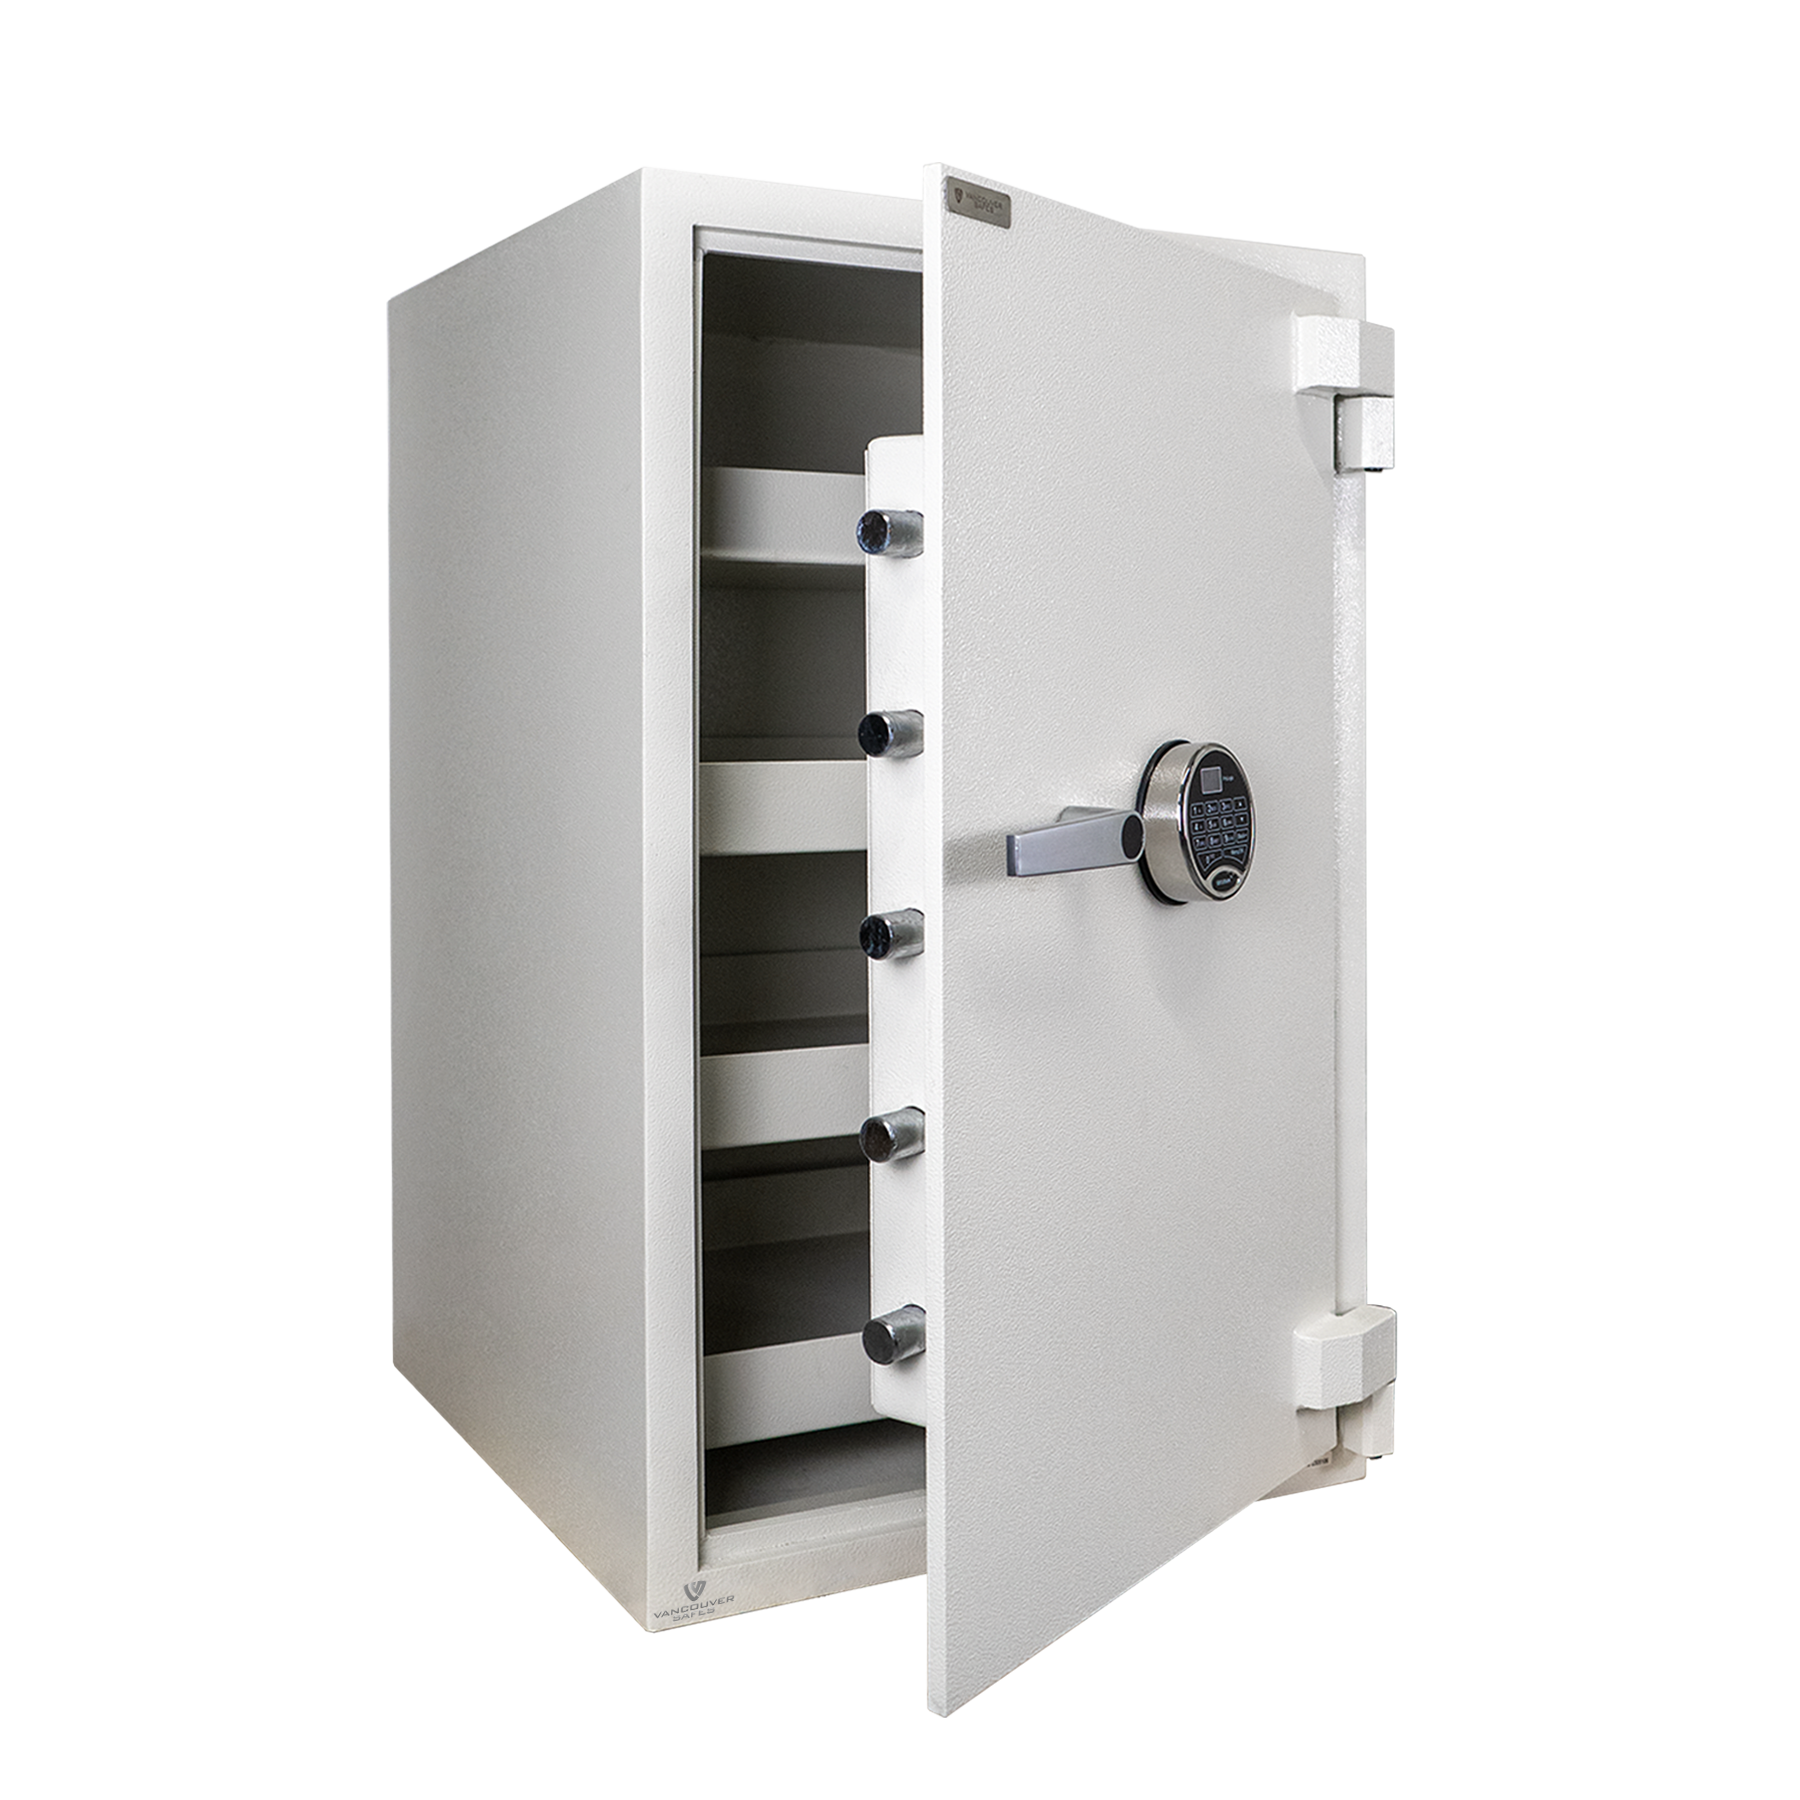 B-3521WD Pharmacy Safe with Time Delay Lock